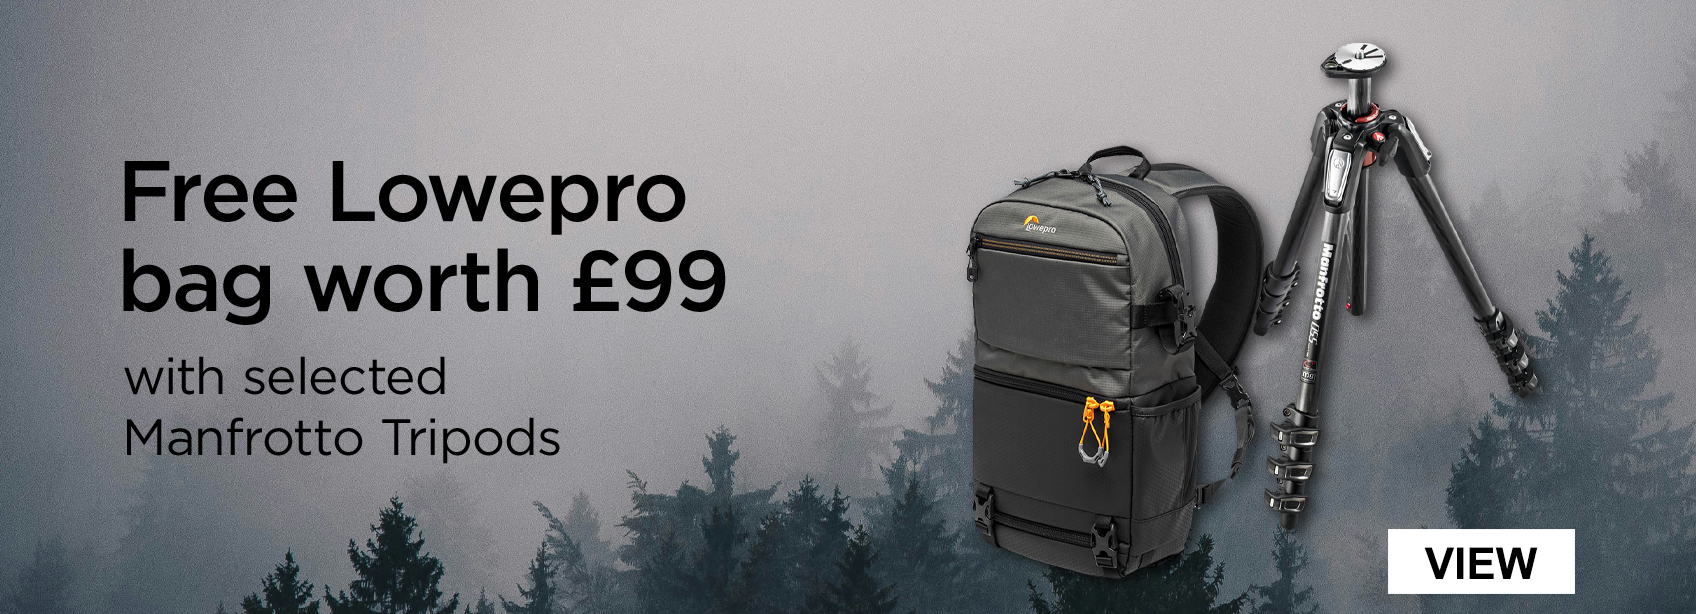 Free Lowepro bag worth £99 with selected Manfrotto Tripods